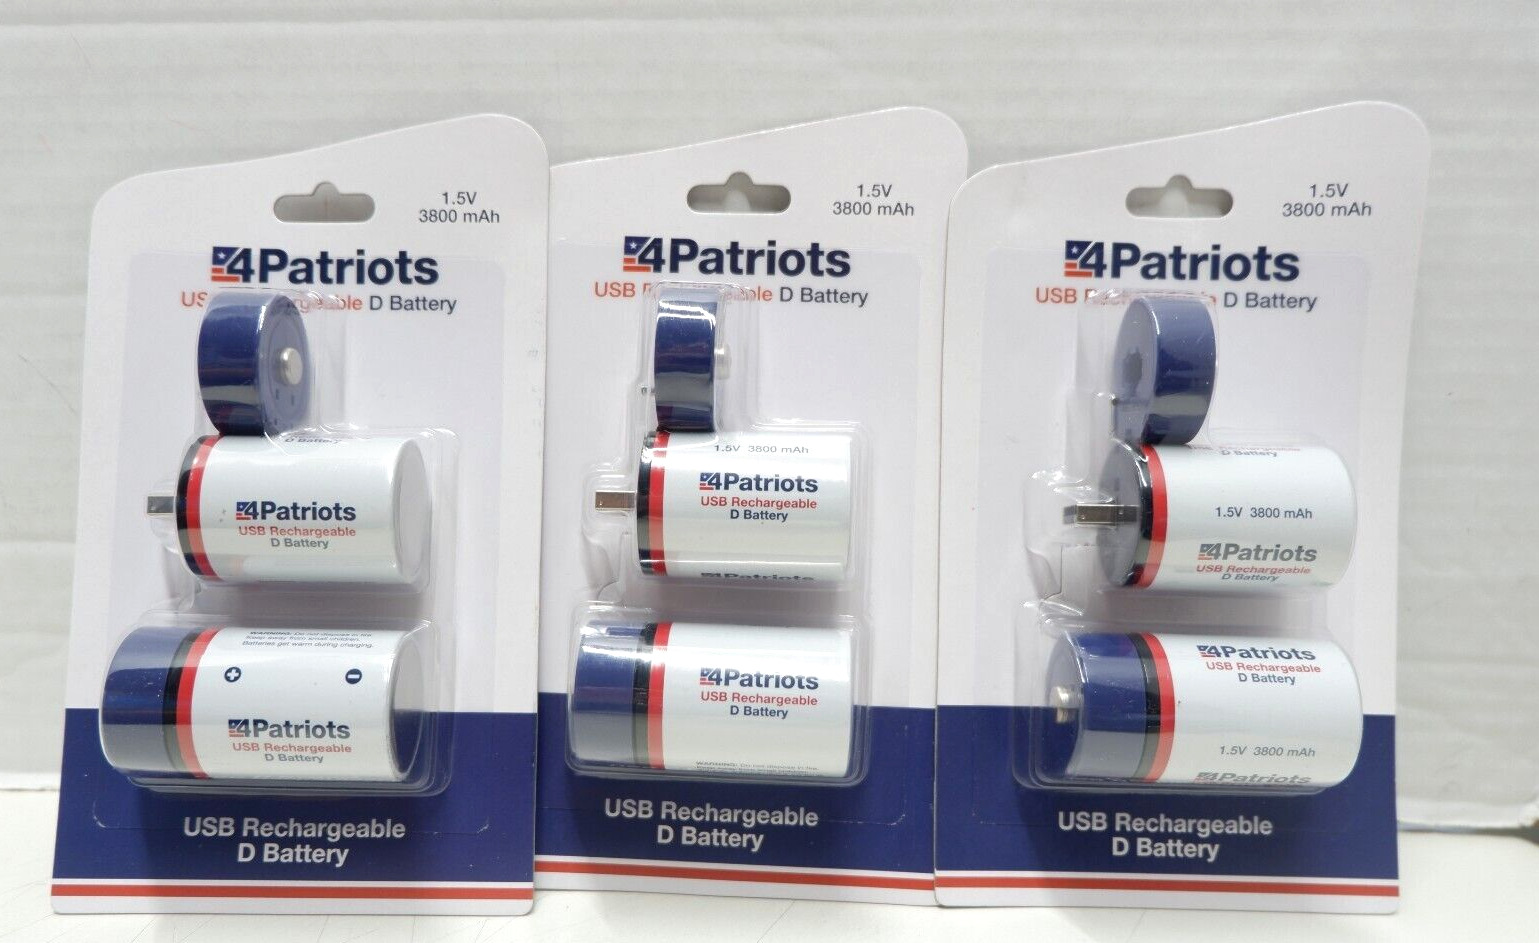 LOT of 3 Packages as Shown - 4Patriots USB Rechargeable D Batteries (6 total)